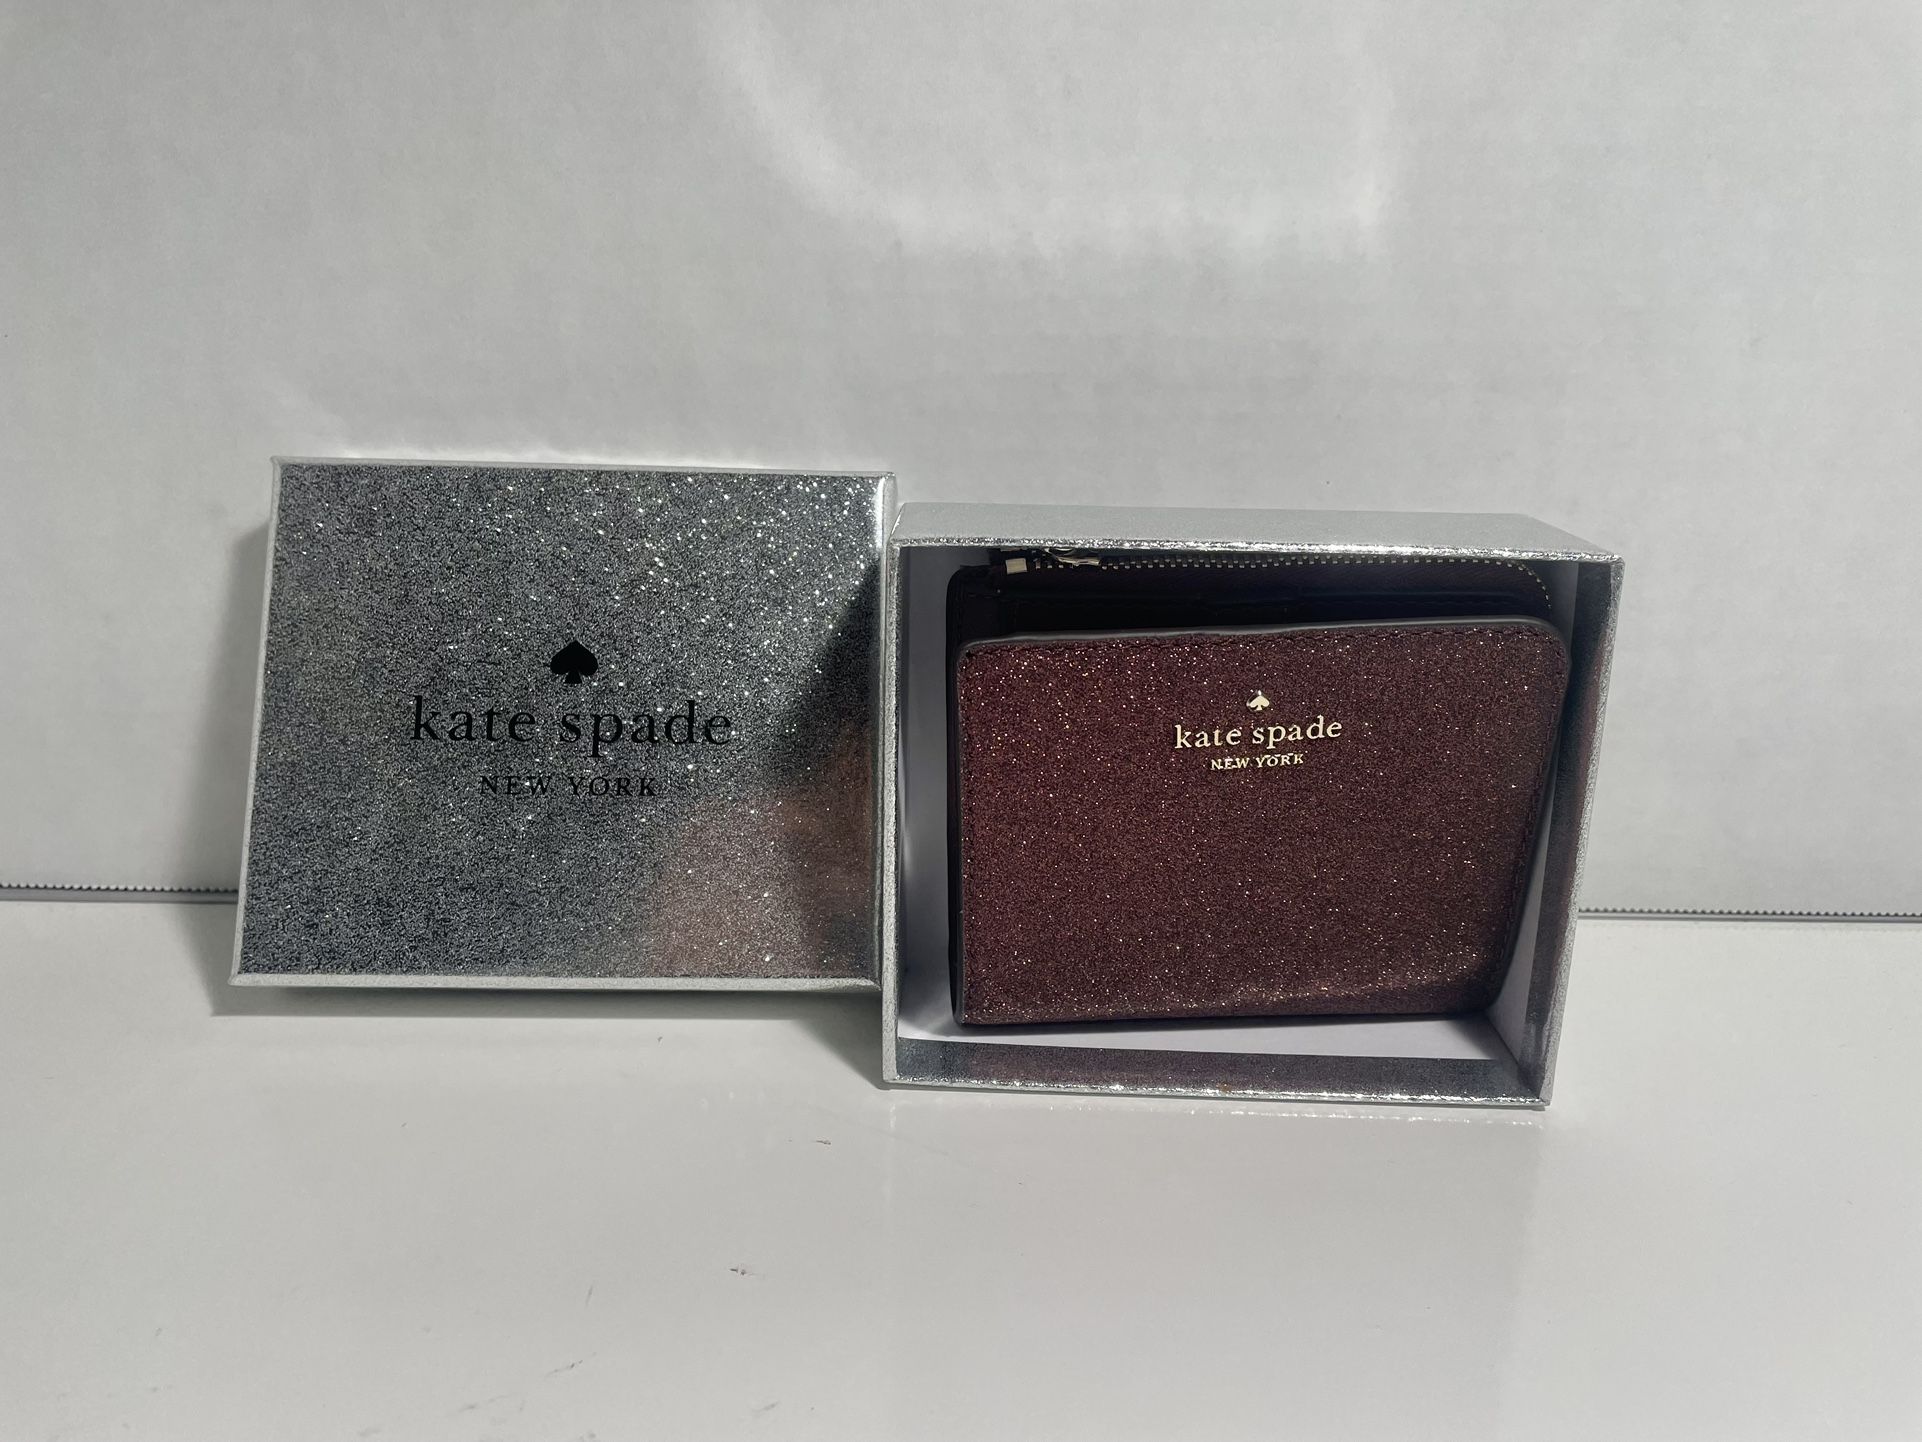 Authentic ‘Kate Spade’ Bifold Wallet